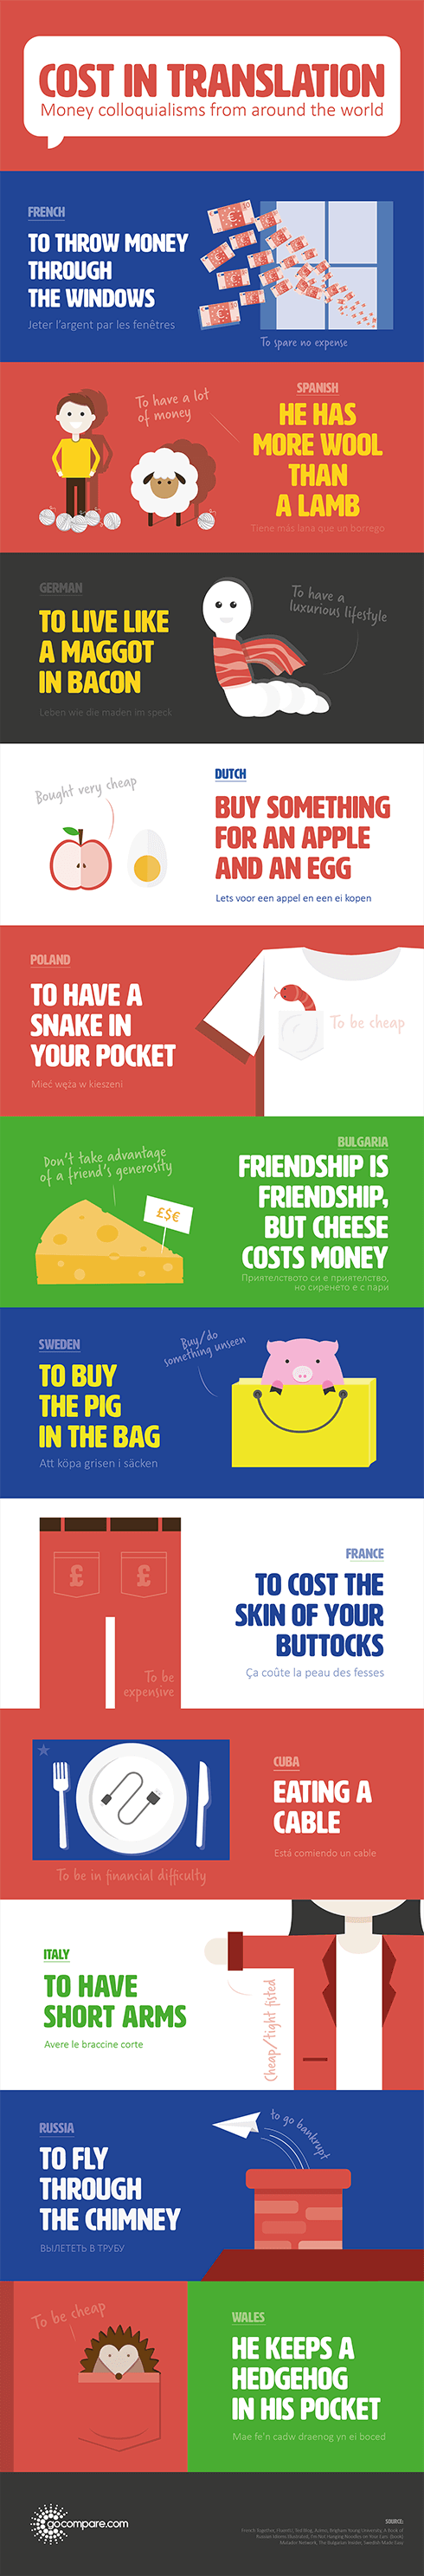 http://www.gocompare.com/infographics-content/540968/cost-in-translation_main.png?view=Standard